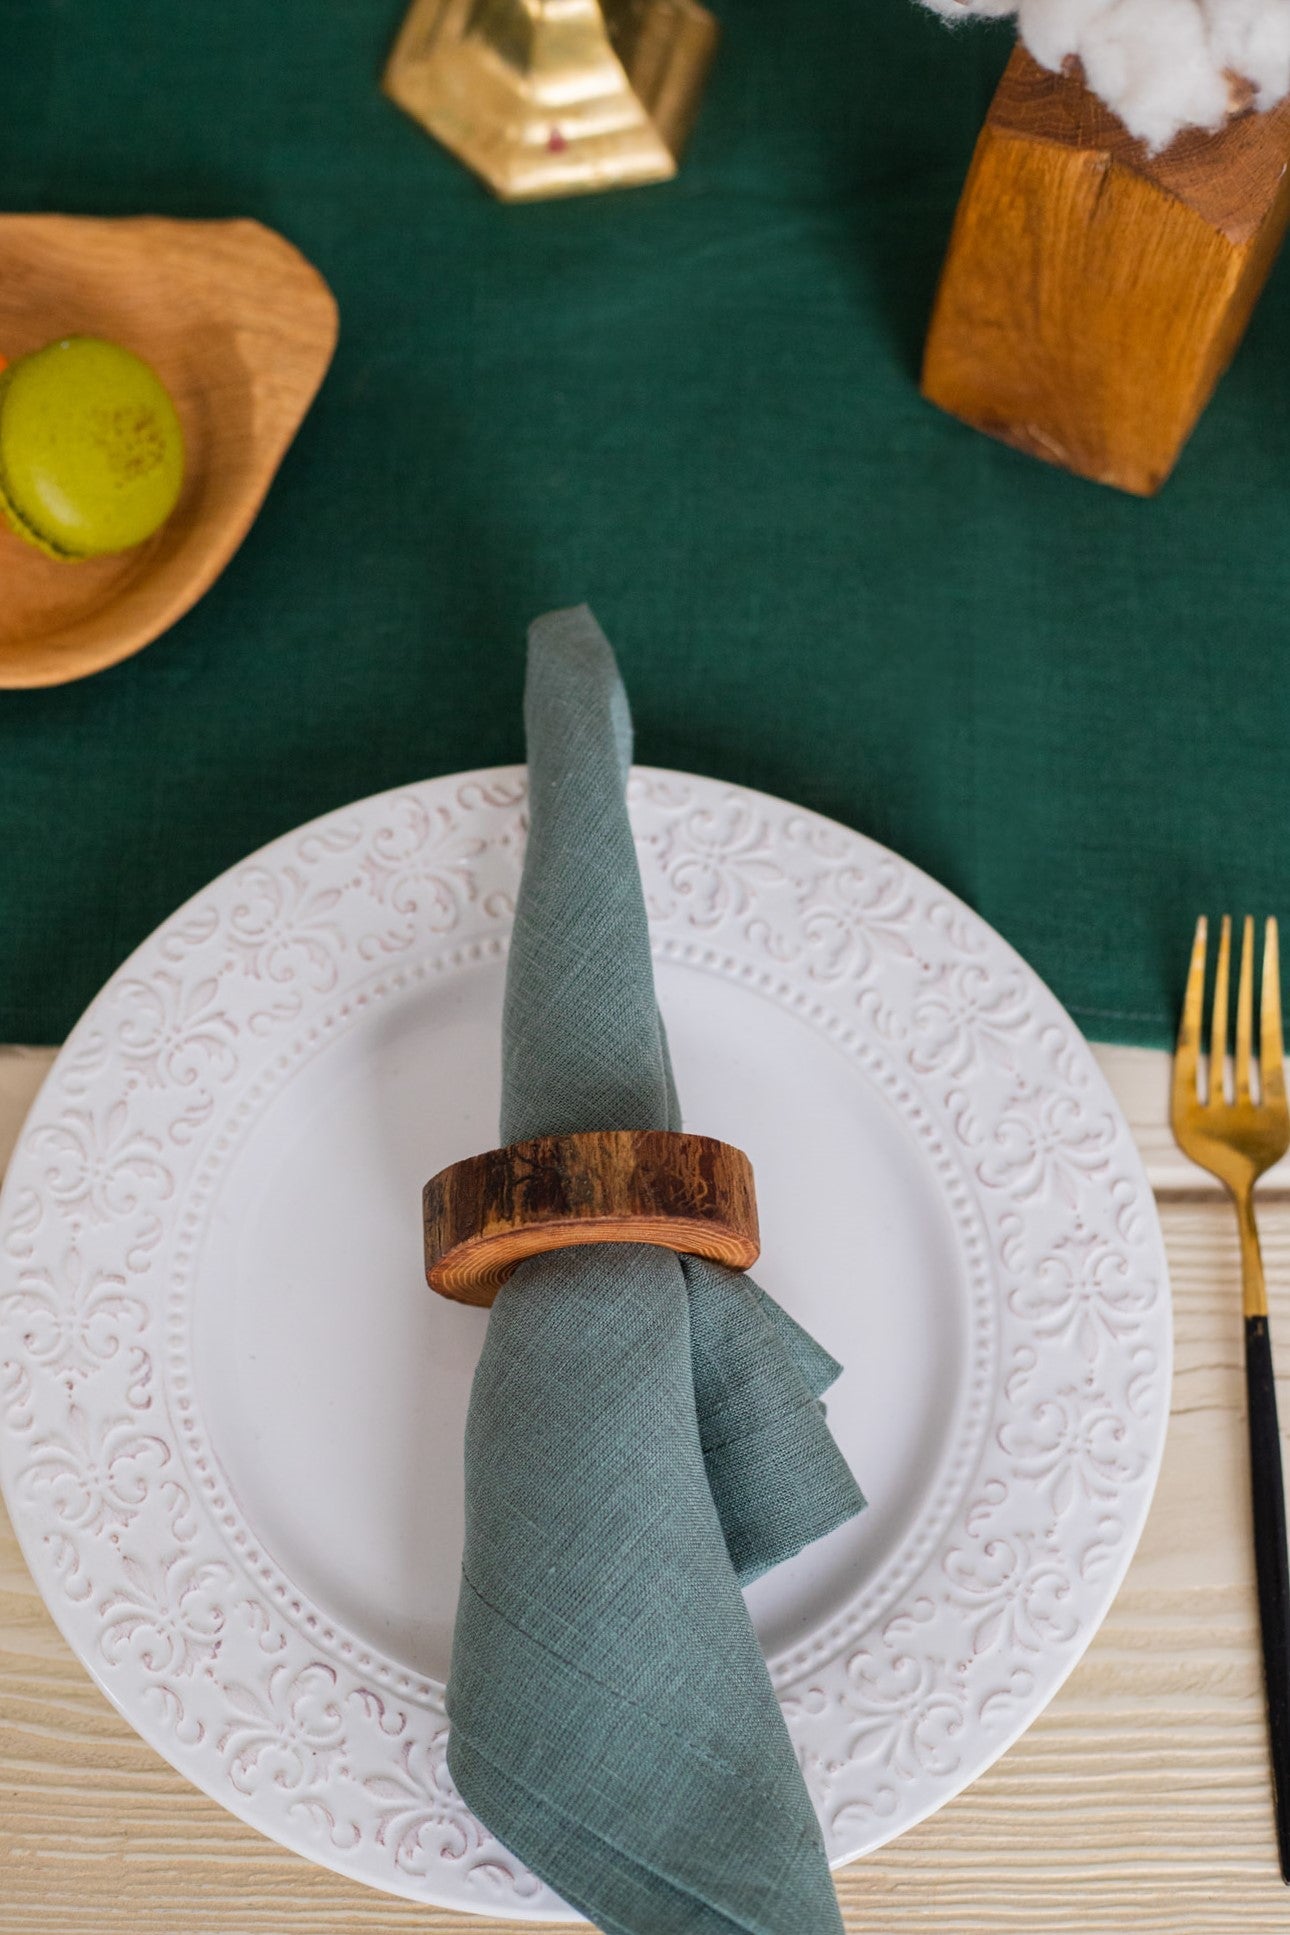 2 Set of Elegant Hand-Carved Round Wooden Napkin Rings – The Modern Heritage